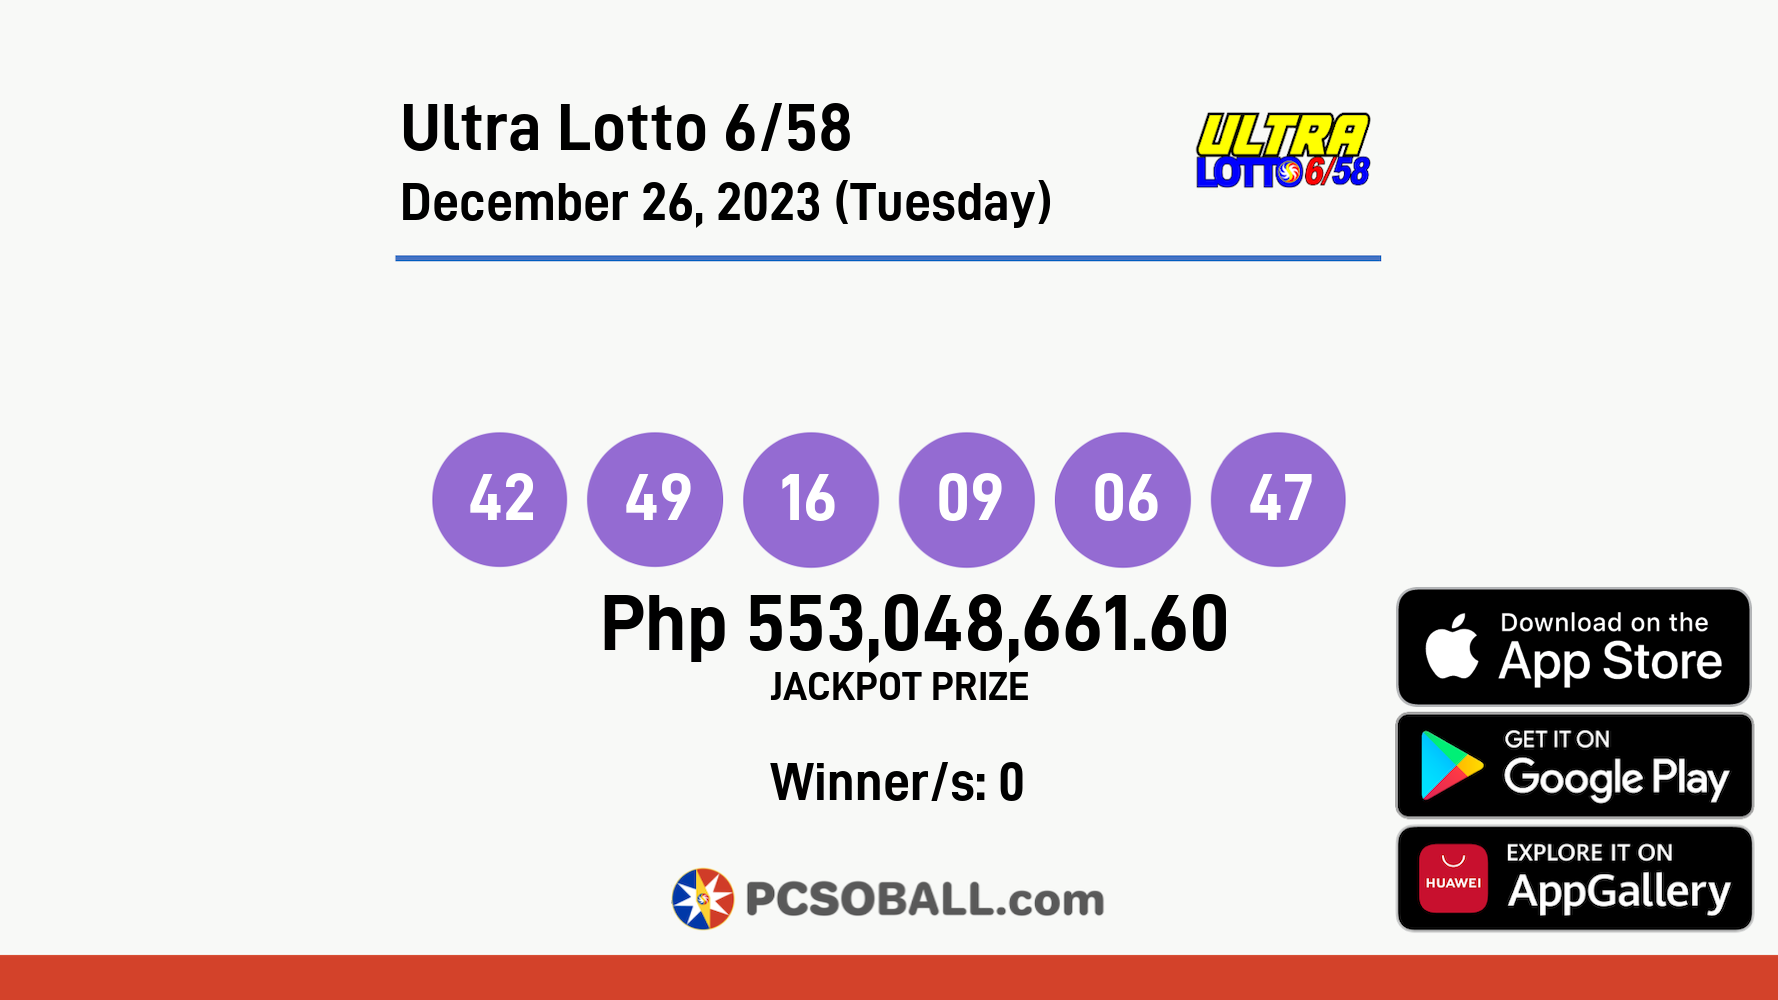 Ultra Lotto 6/58 December 26, 2023 (Tuesday) Result